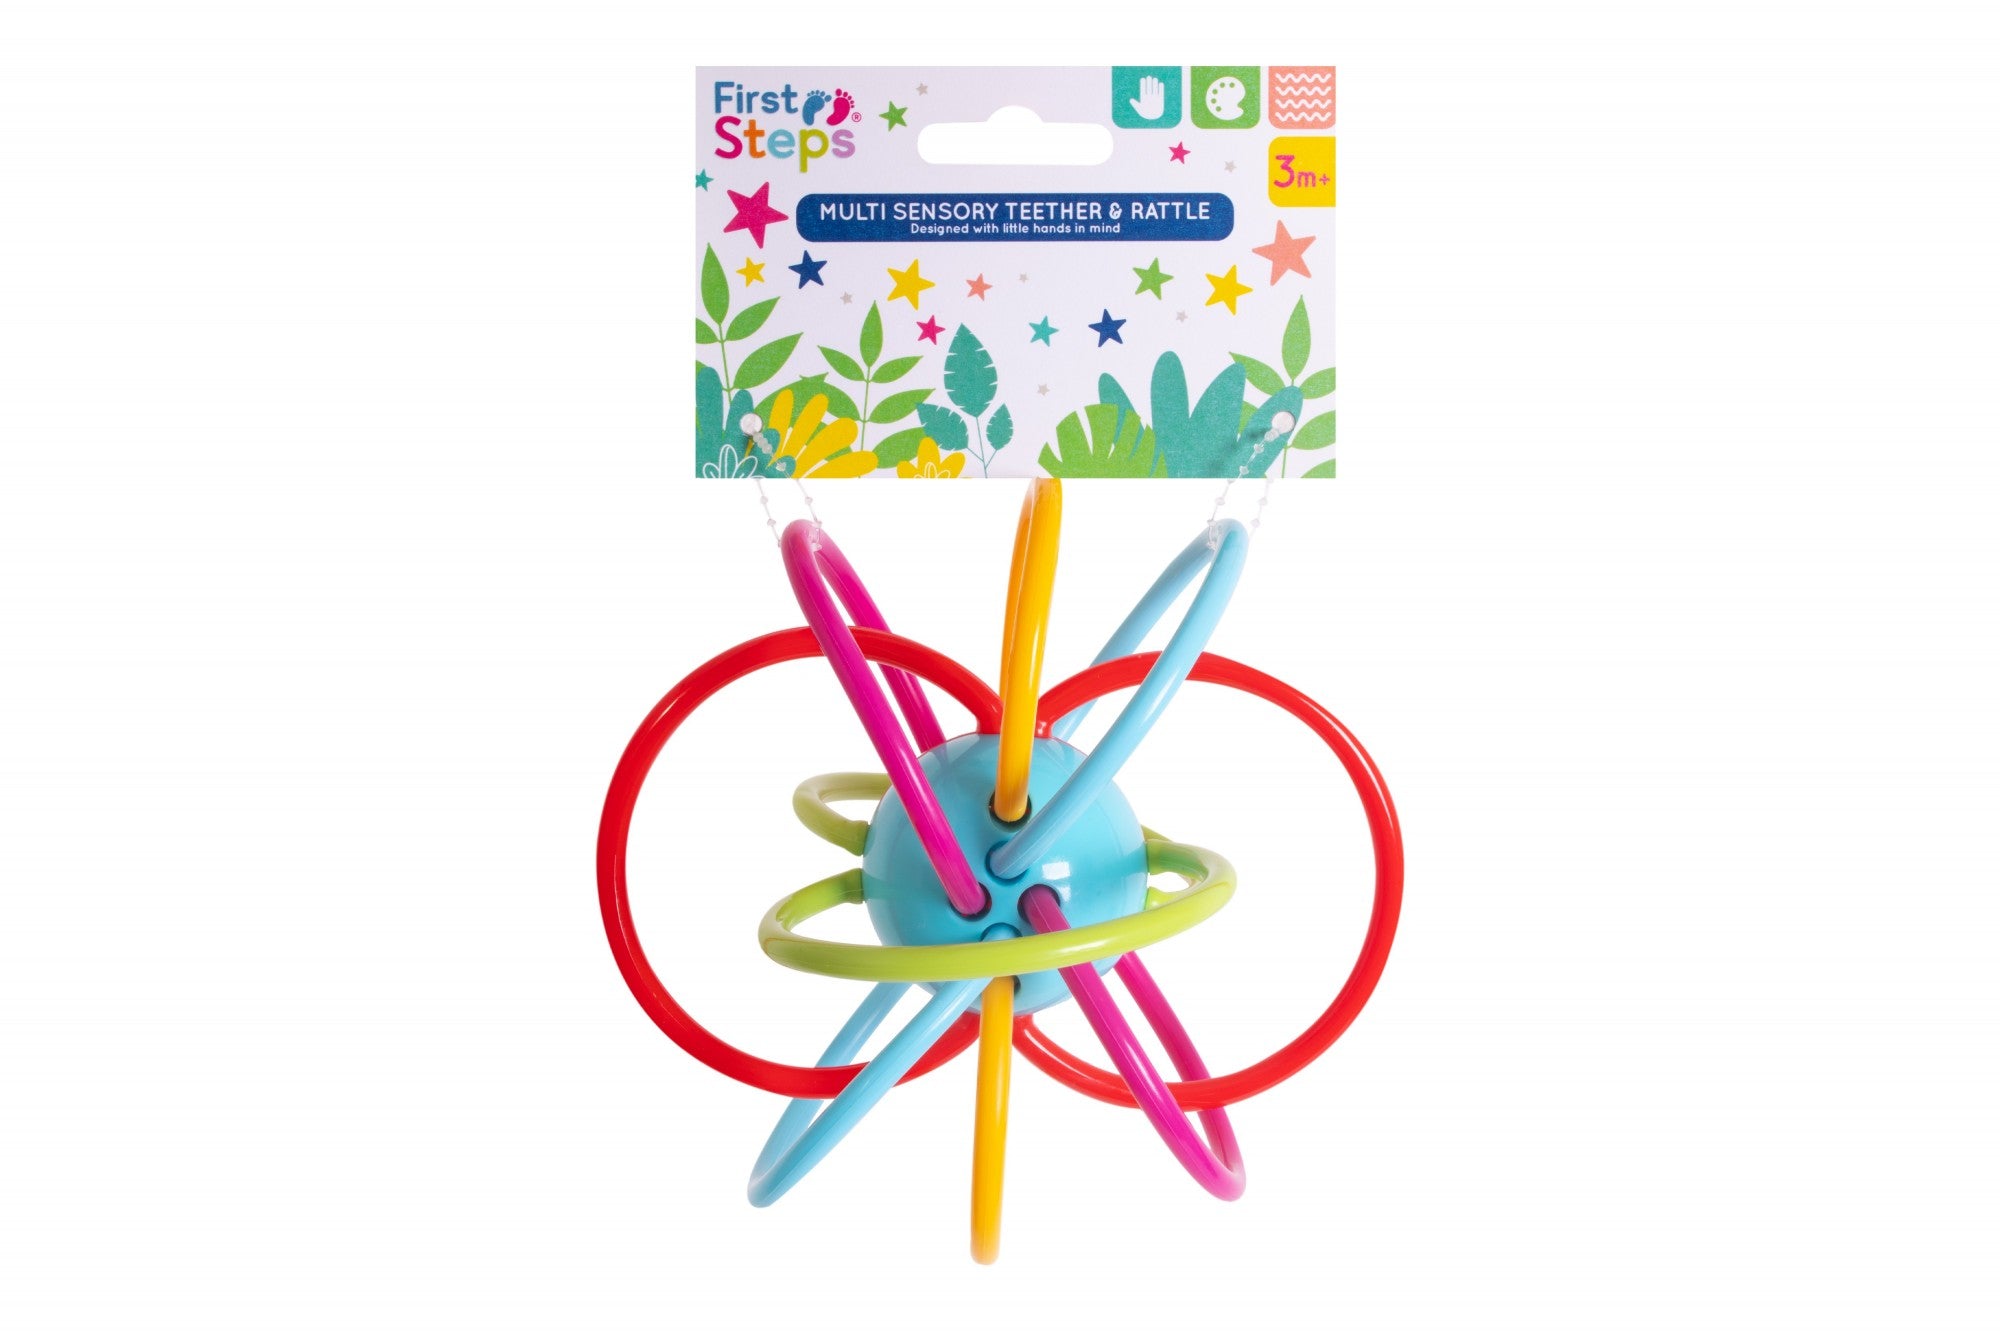 View Loop Rattle Teether Toy information